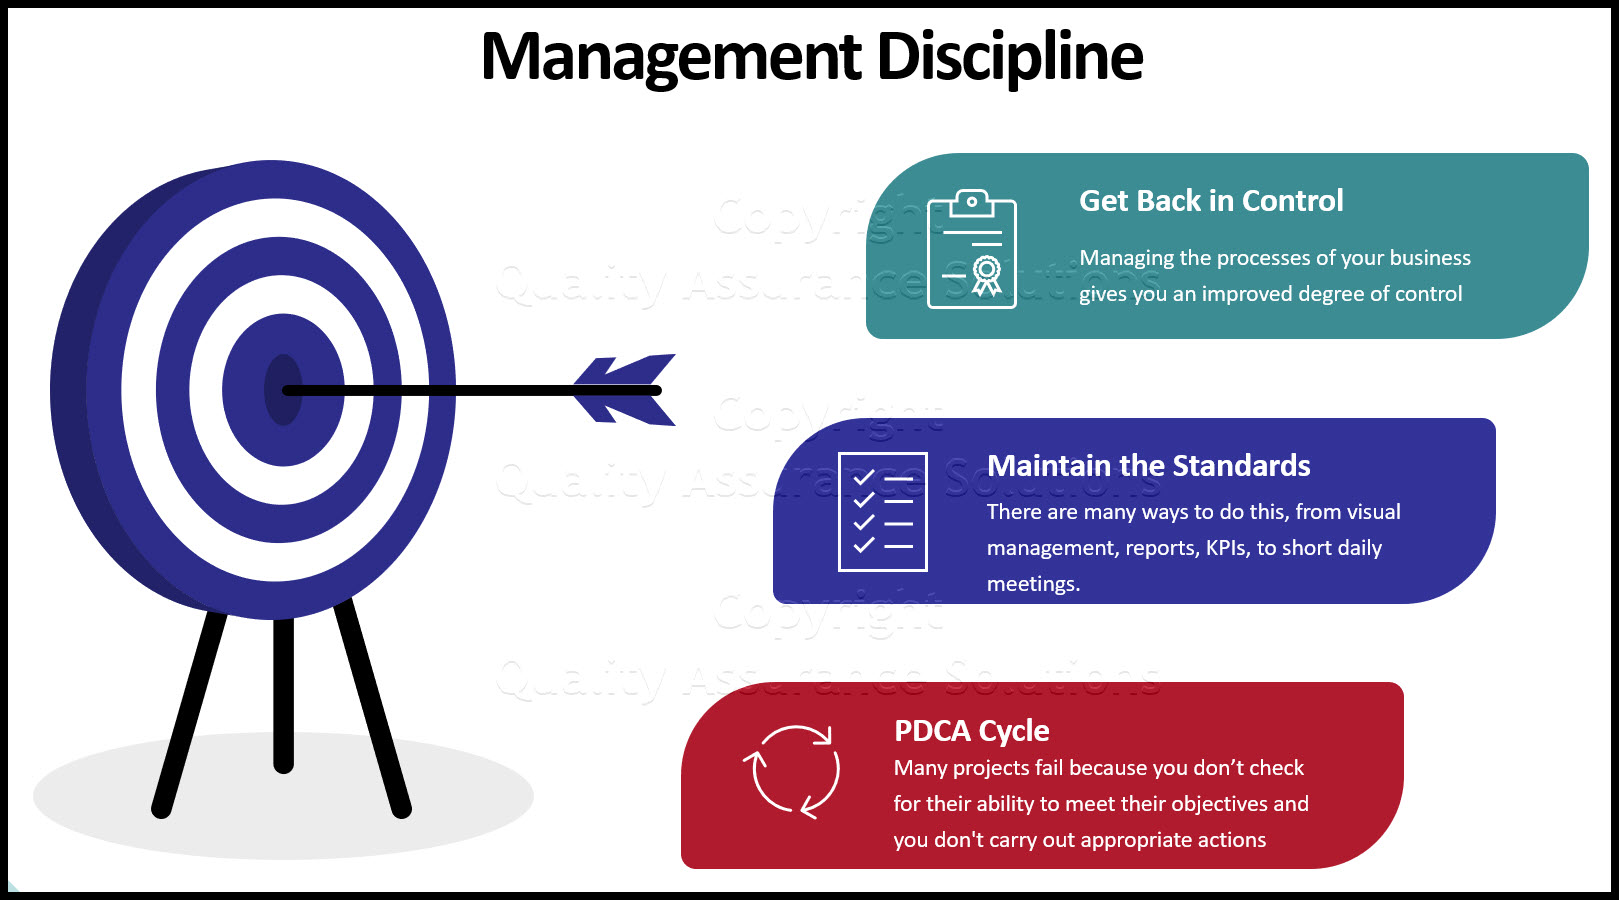 Business management discipline depends on control and routines. Learn how to implement these critical features to your business